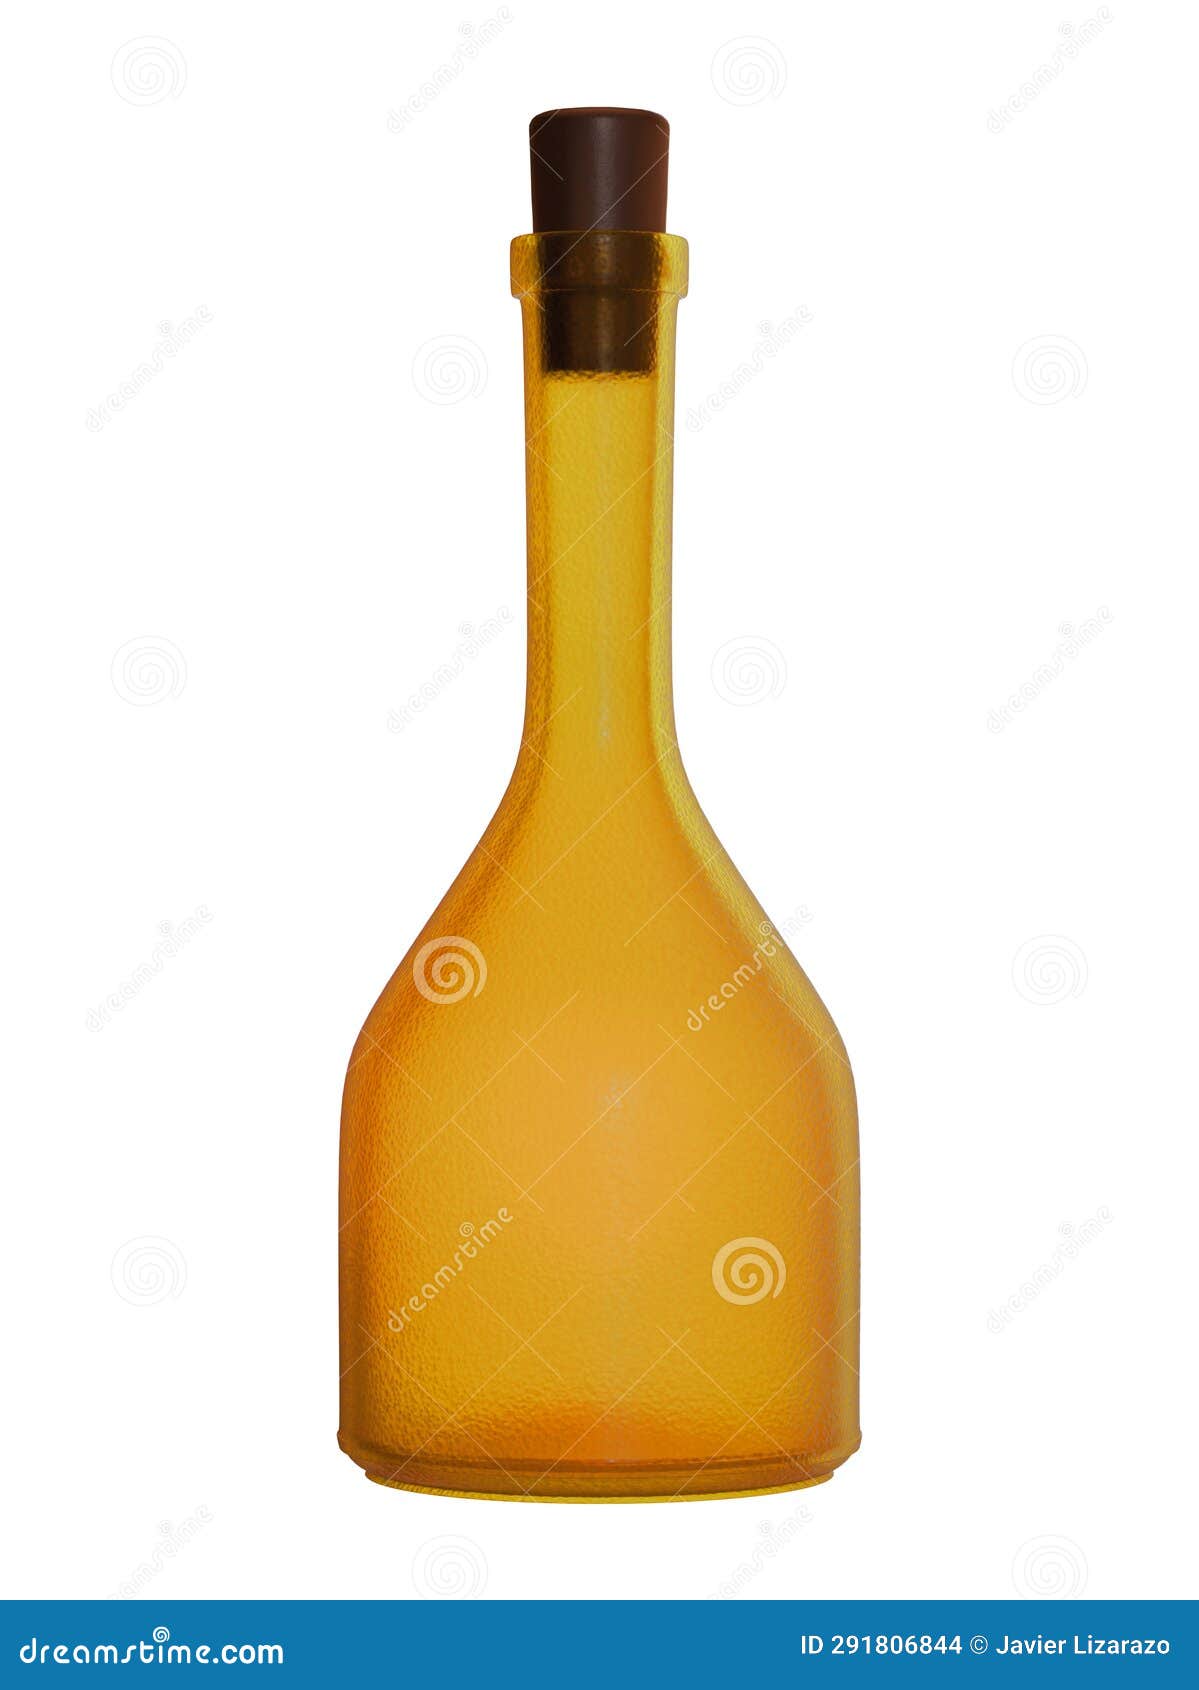 clear glass and yellow bottle for liquor poison or potion